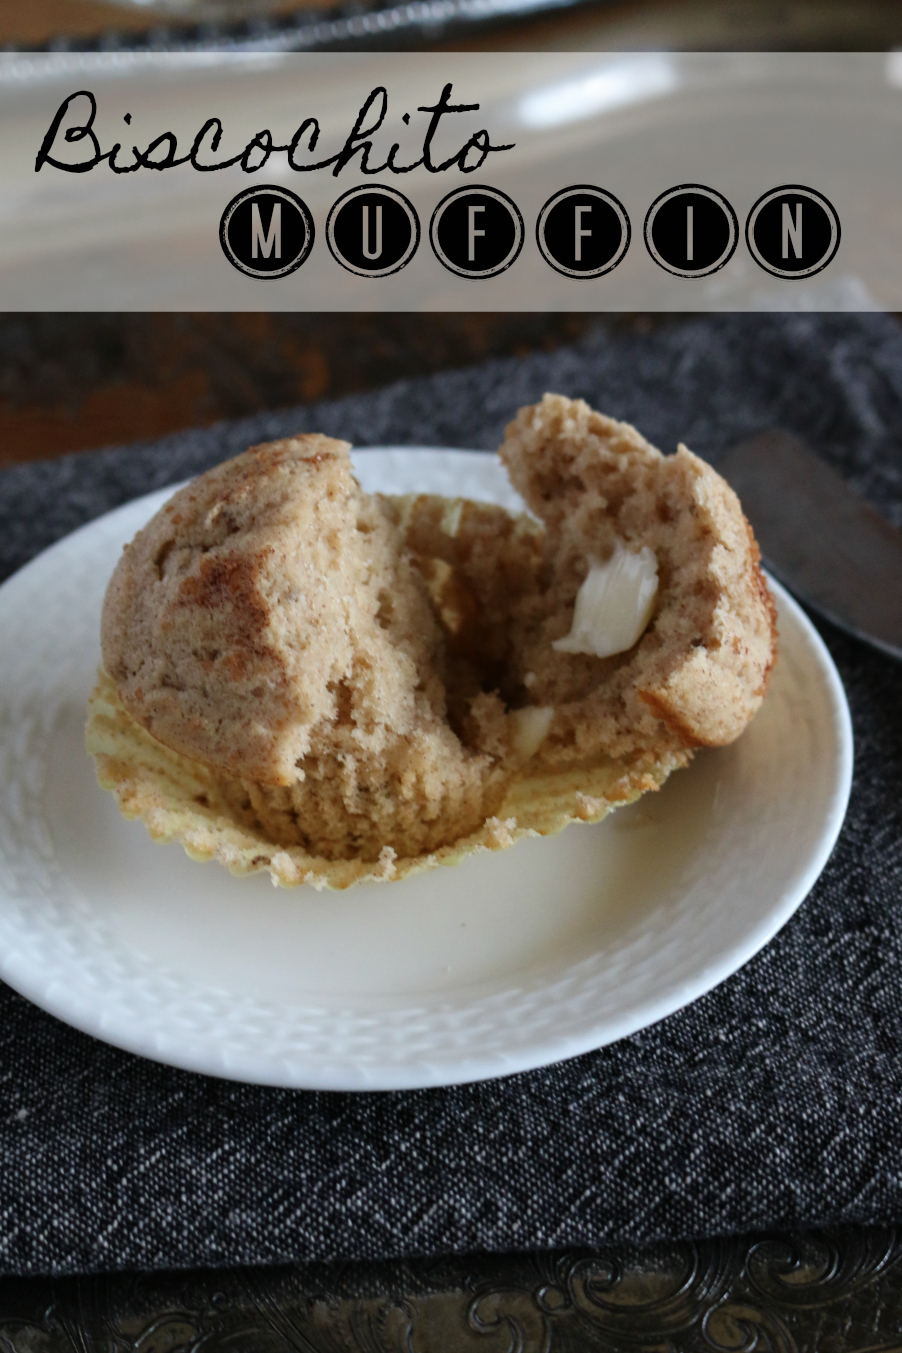 Biscochito Muffin Recipe CeceliasGoodStuff.com | Good Food for Good People 